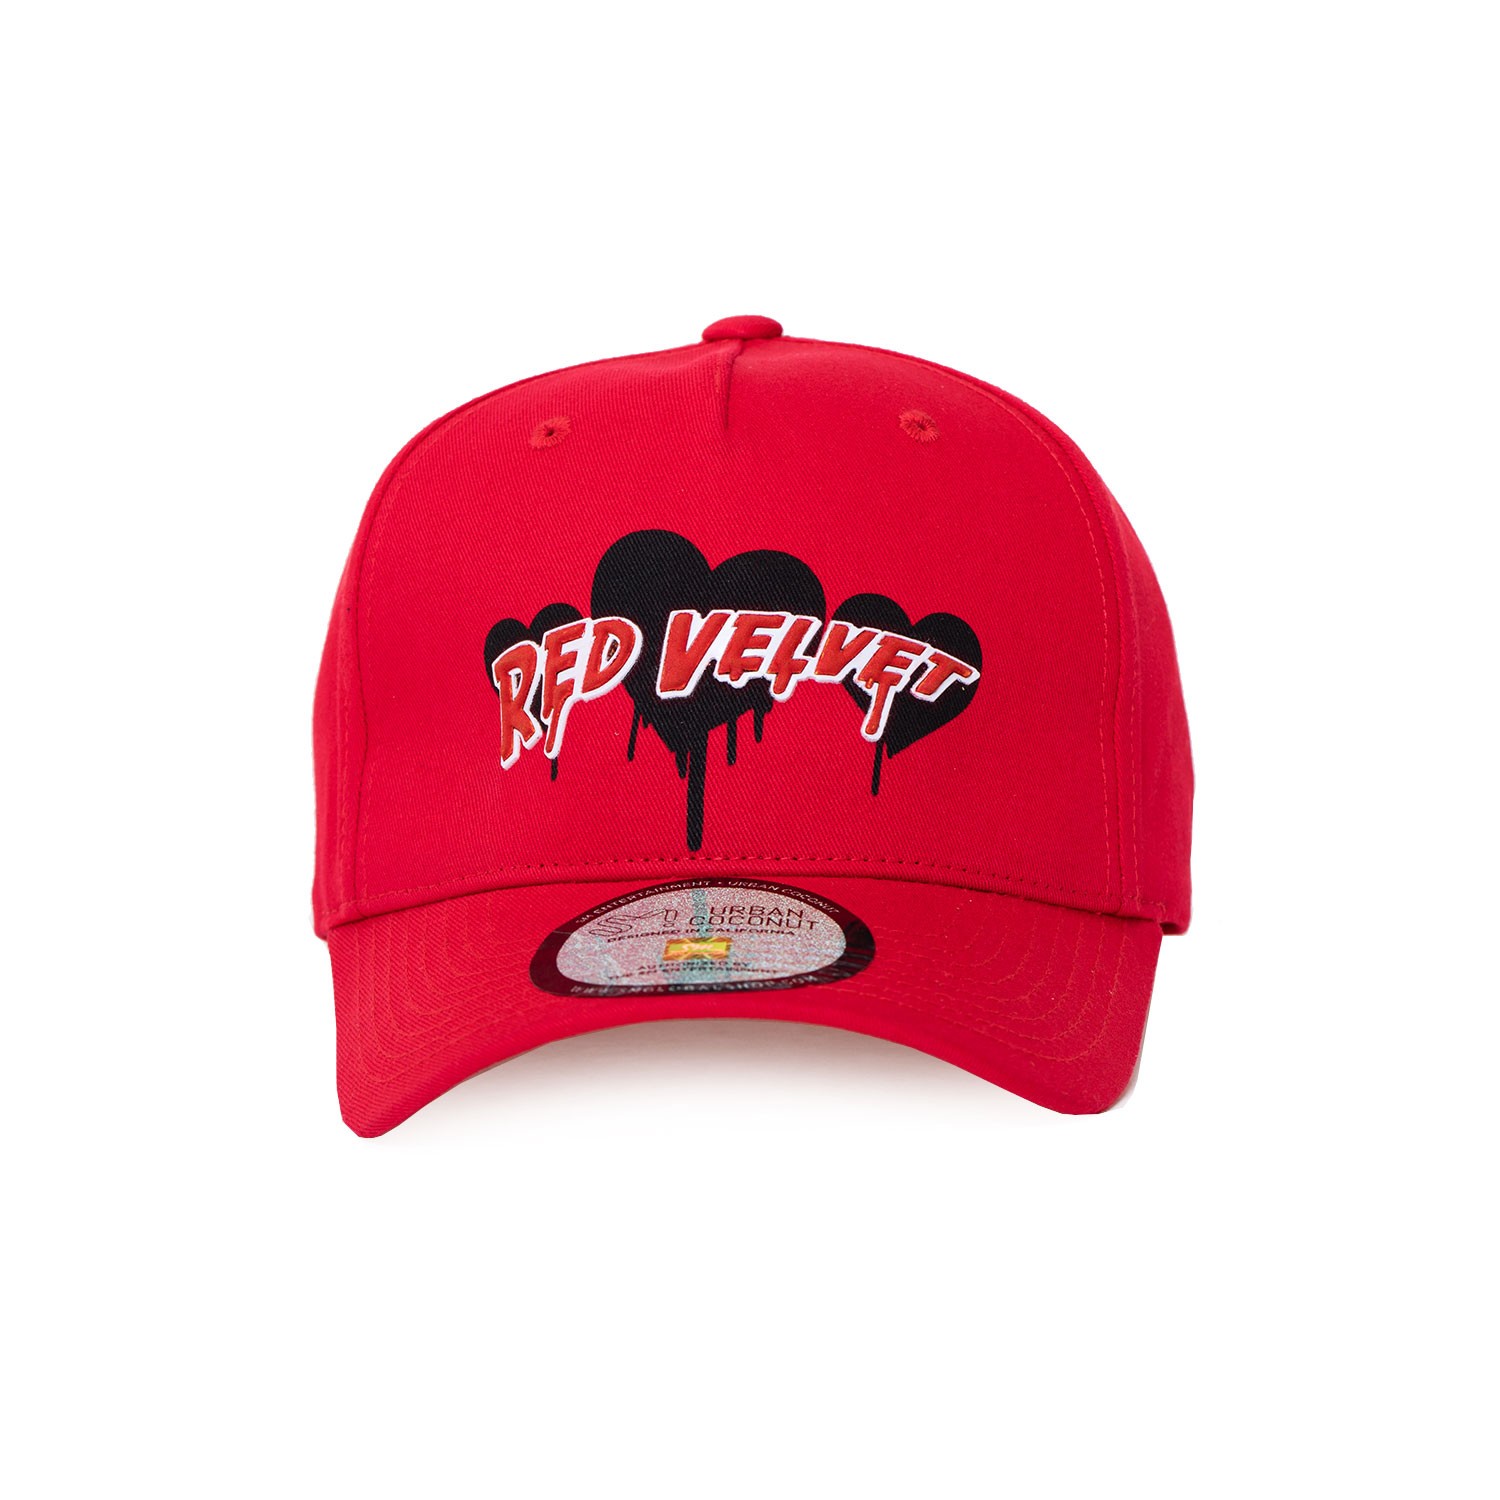 Search - Tag - Red Velvet hat